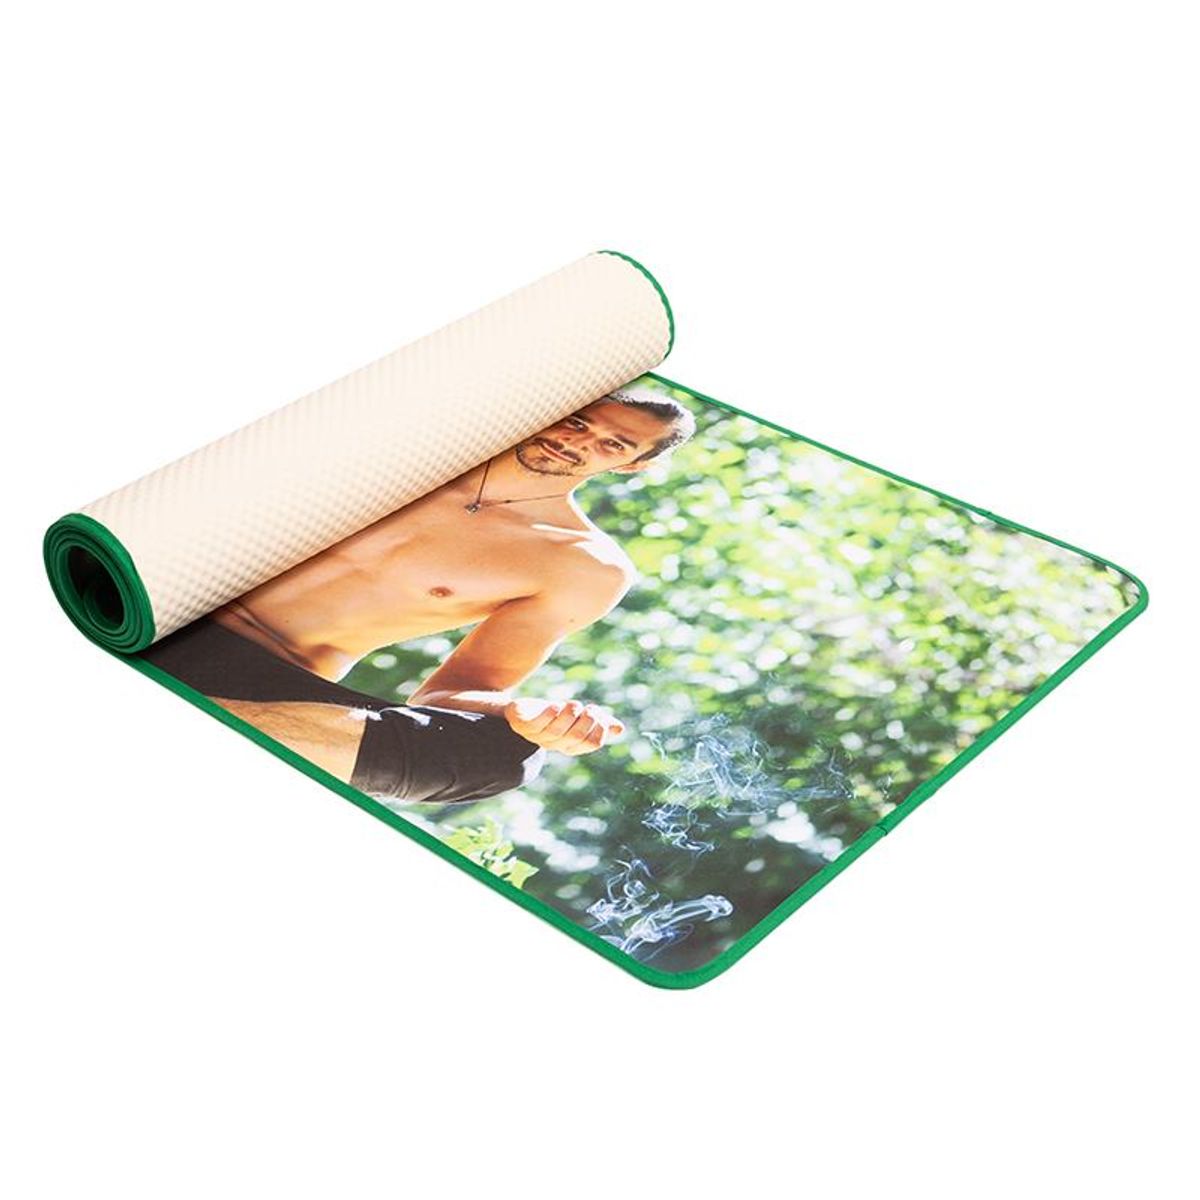 Custom Embroidered Yoga Mat- EMBROIDERED with Lifetime